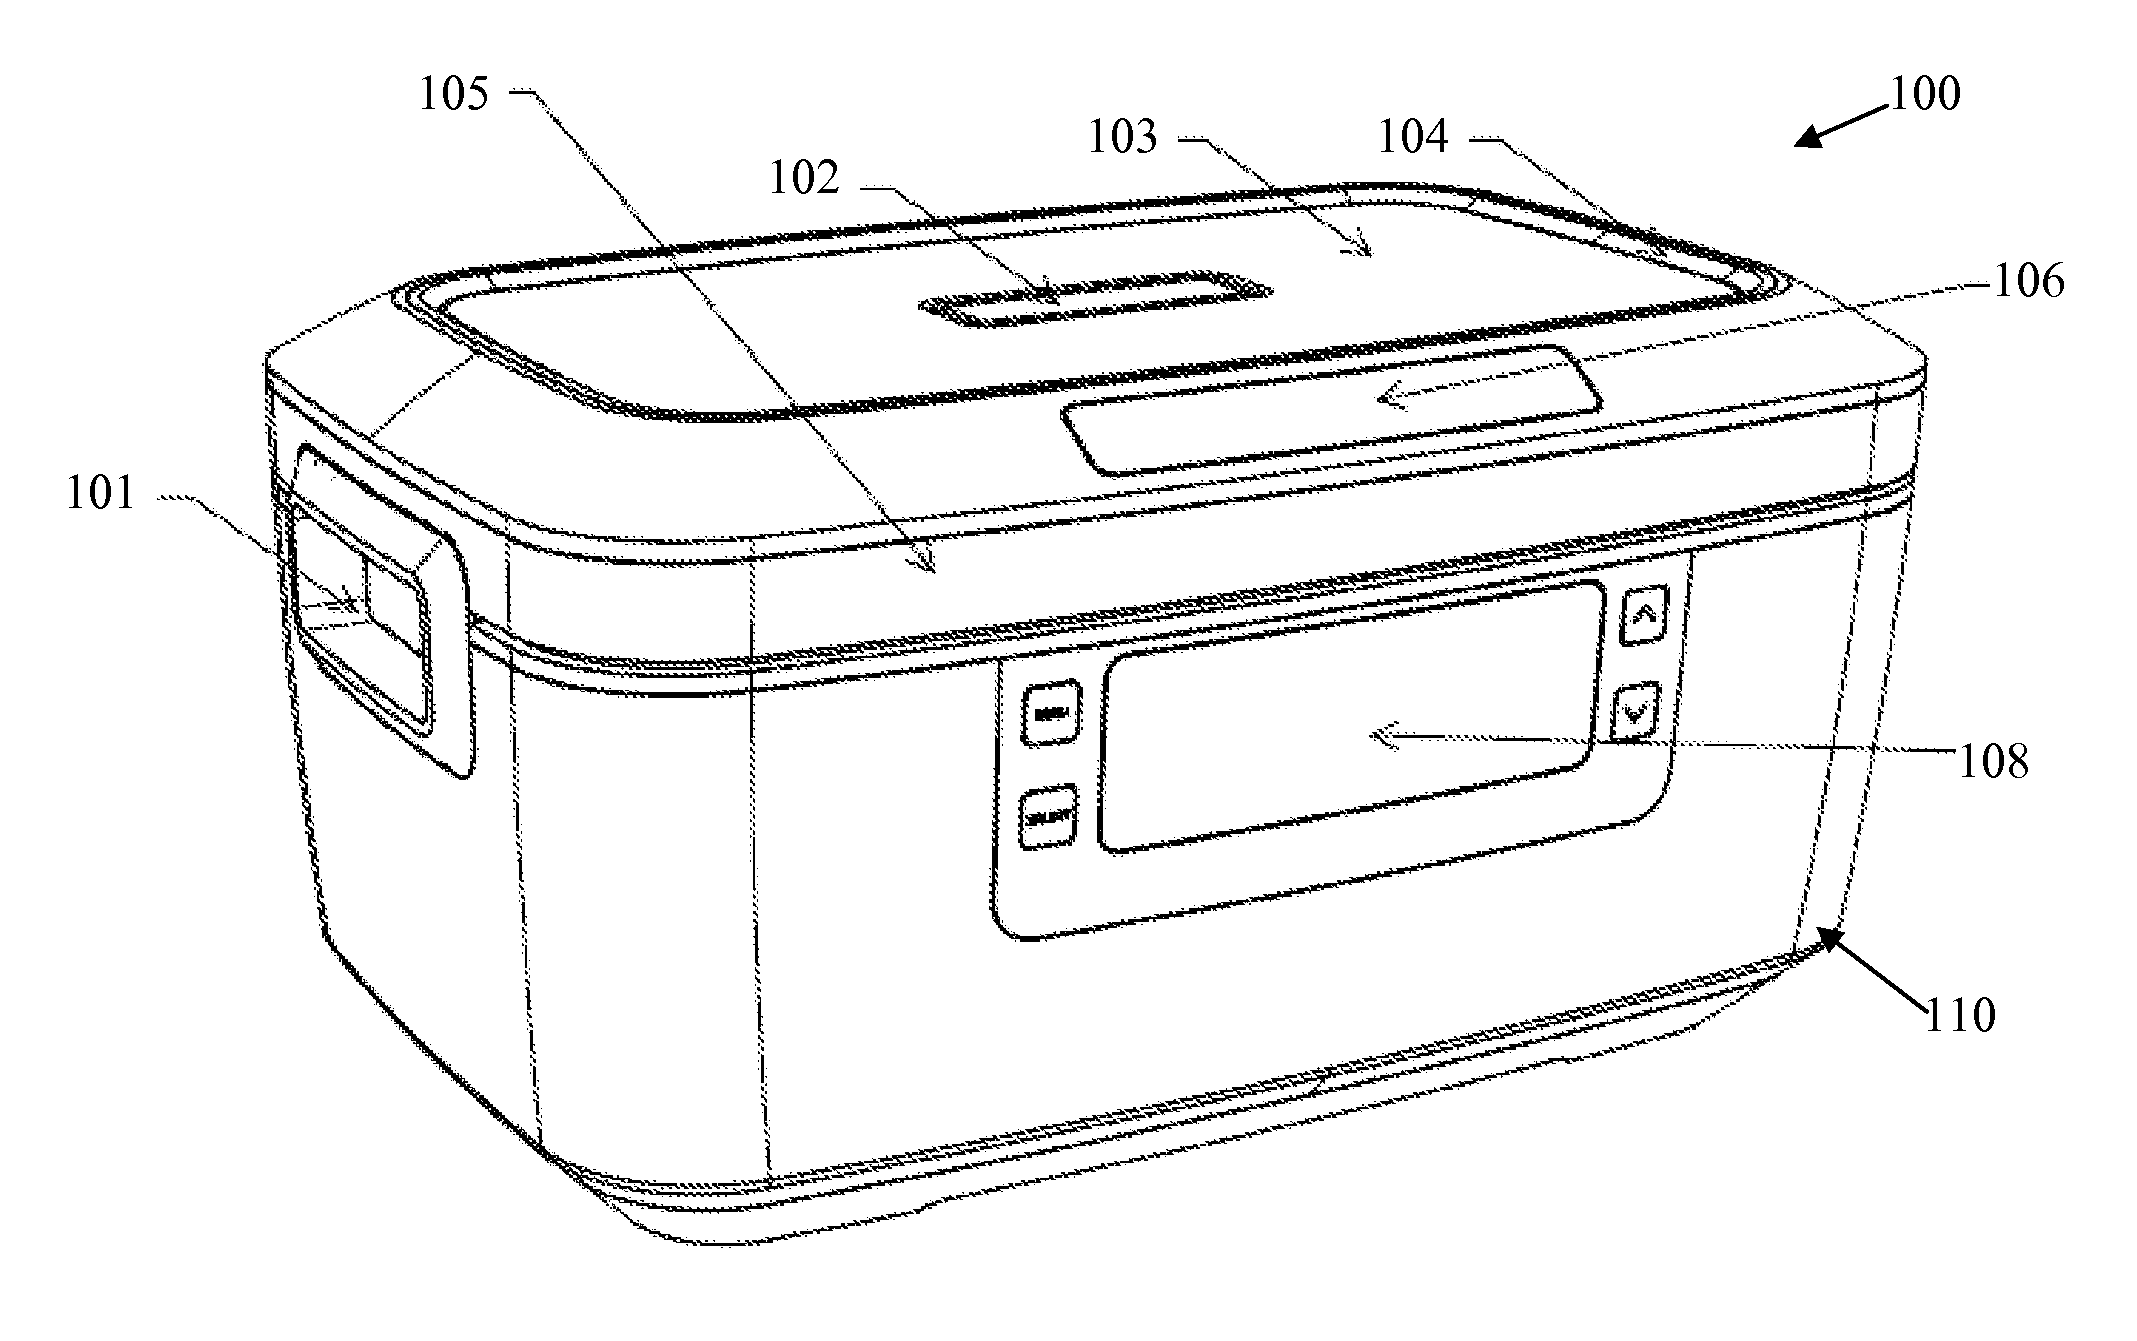 Multi-sectional rice cooker